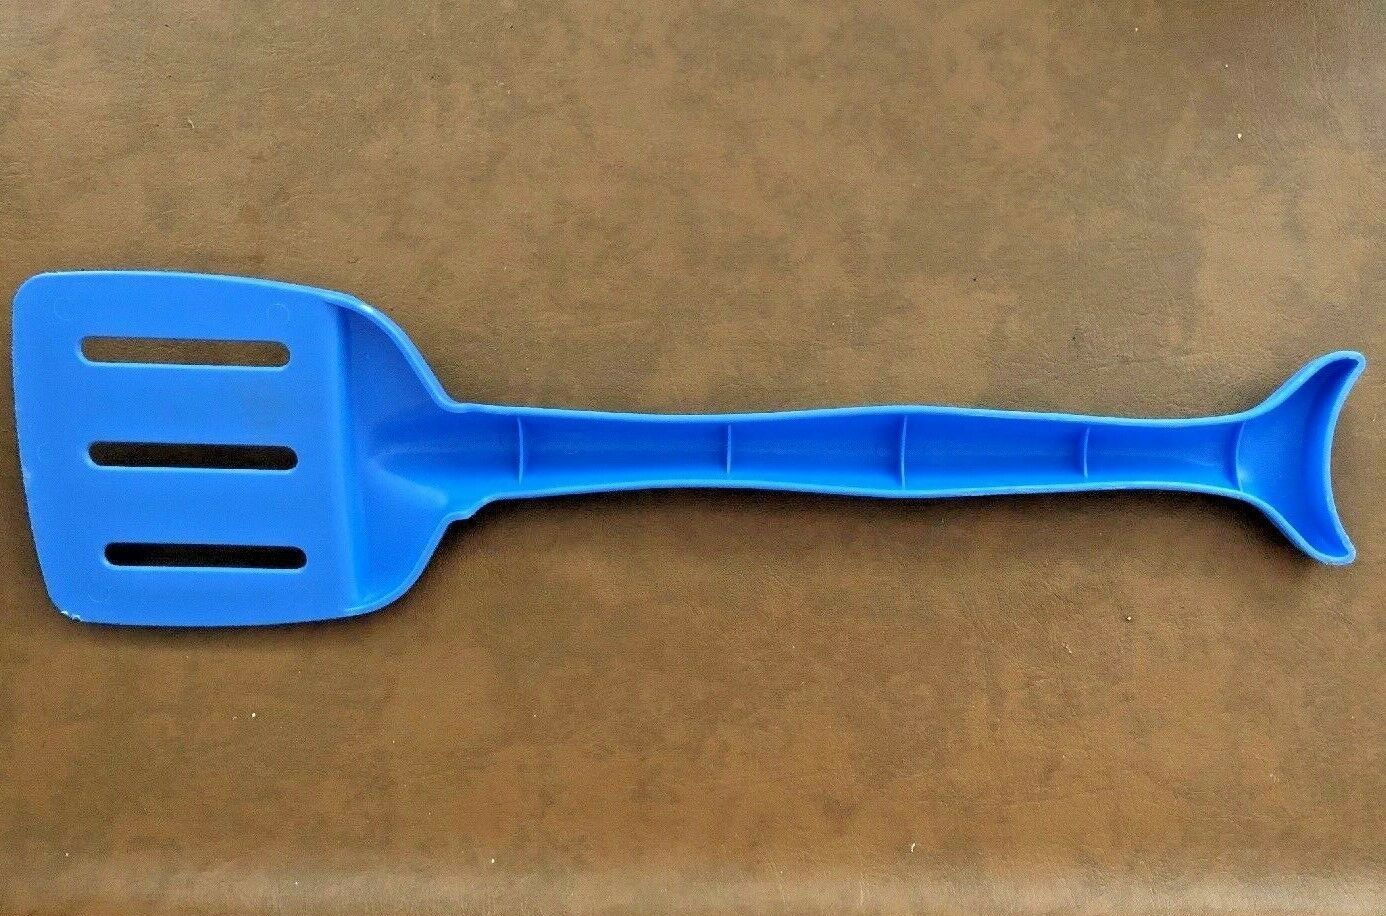 2002 vintage easy bake oven blue spatula and 50 similar items